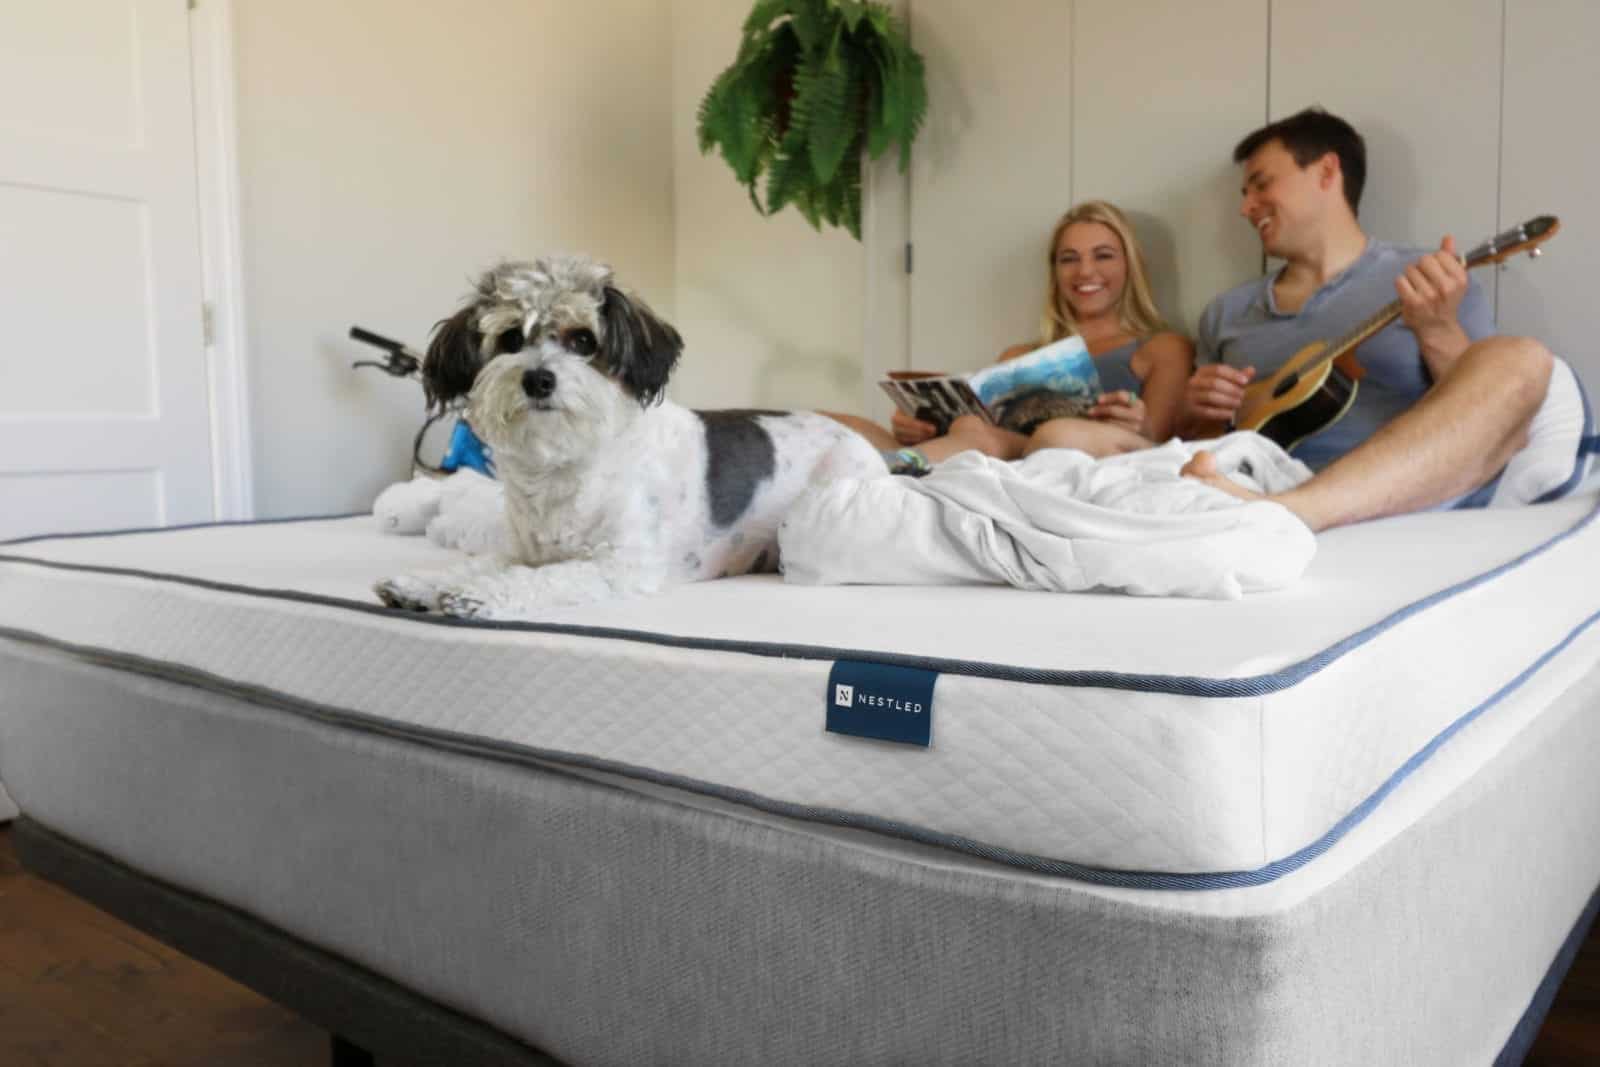 A happy couple enjoying their day on a Nestled organic latex mattress topper with their puppy.